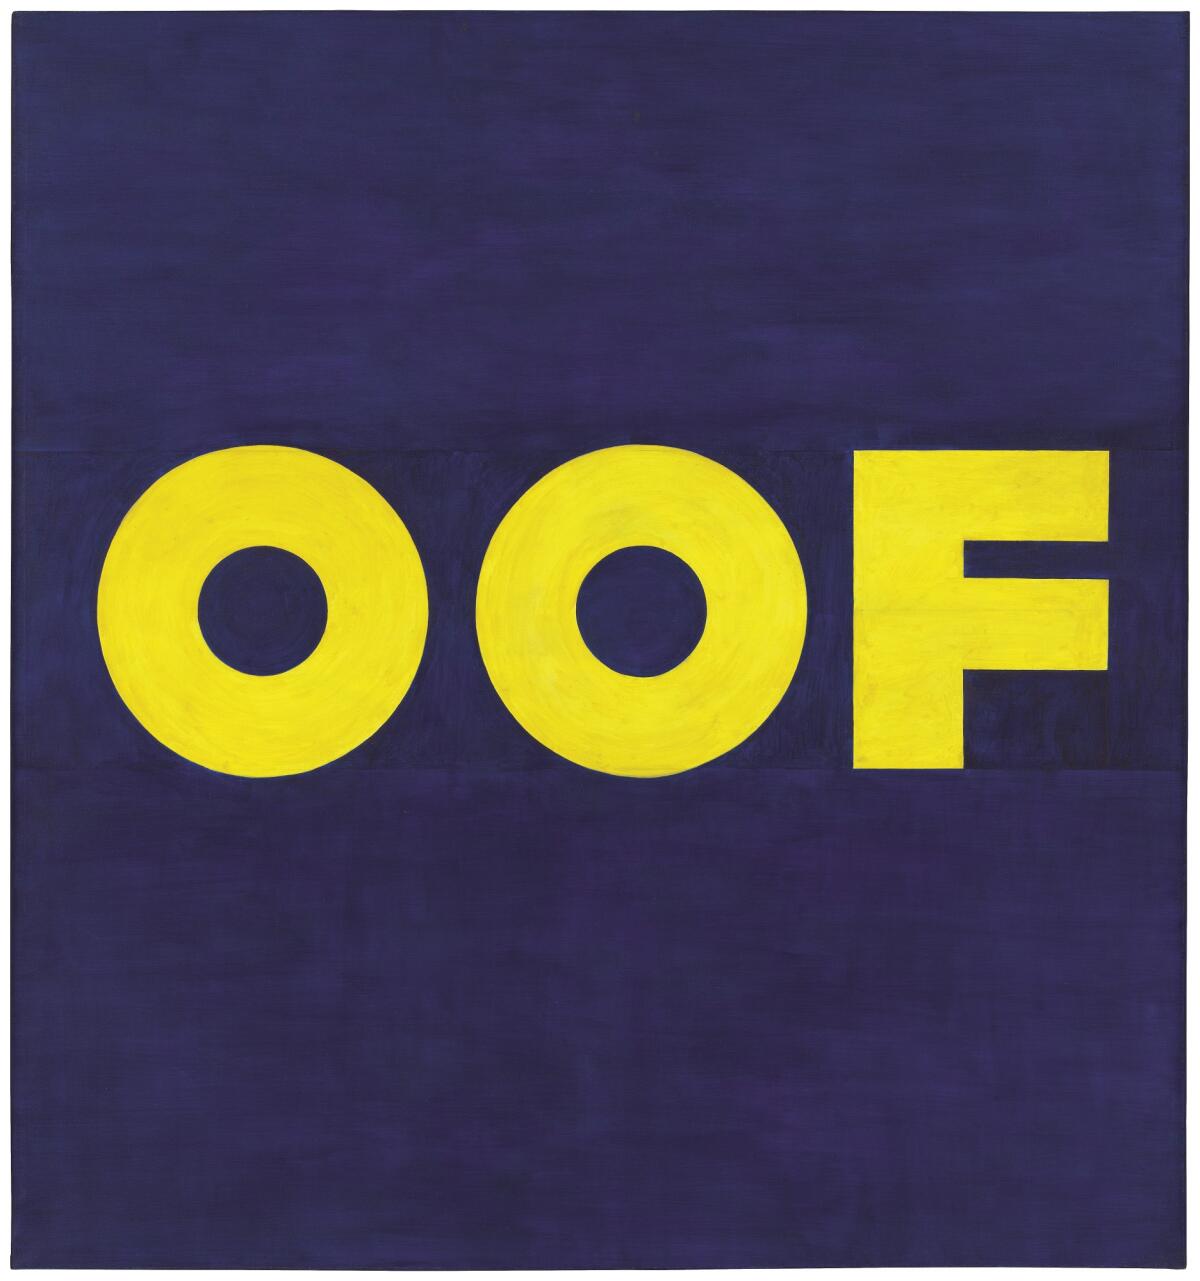 A dark blue canvas with the word "Oof" painted on it in yellow